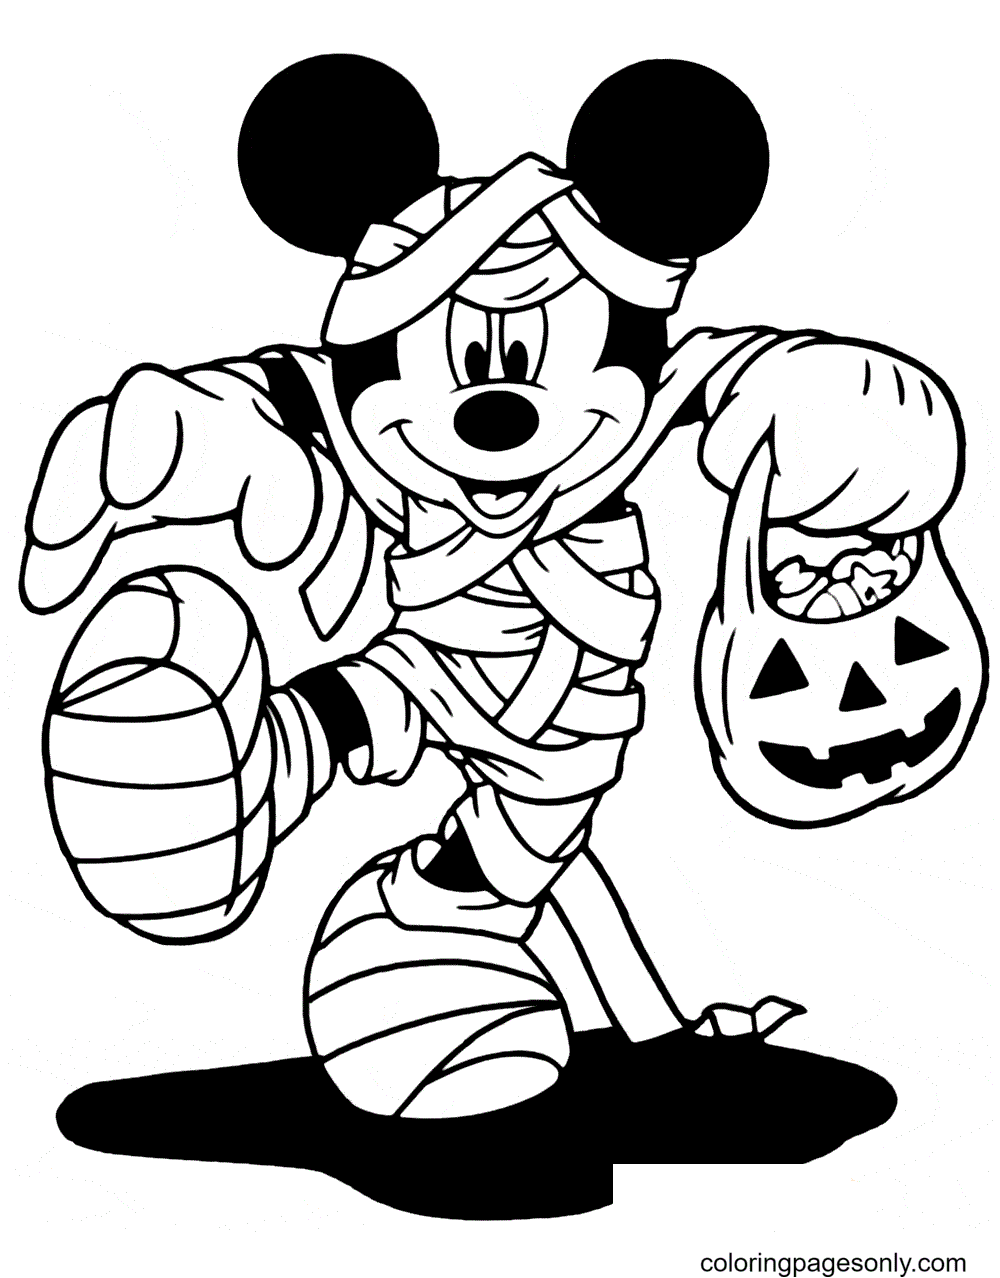 Mummy Mickey auf Hallween Coloring Page